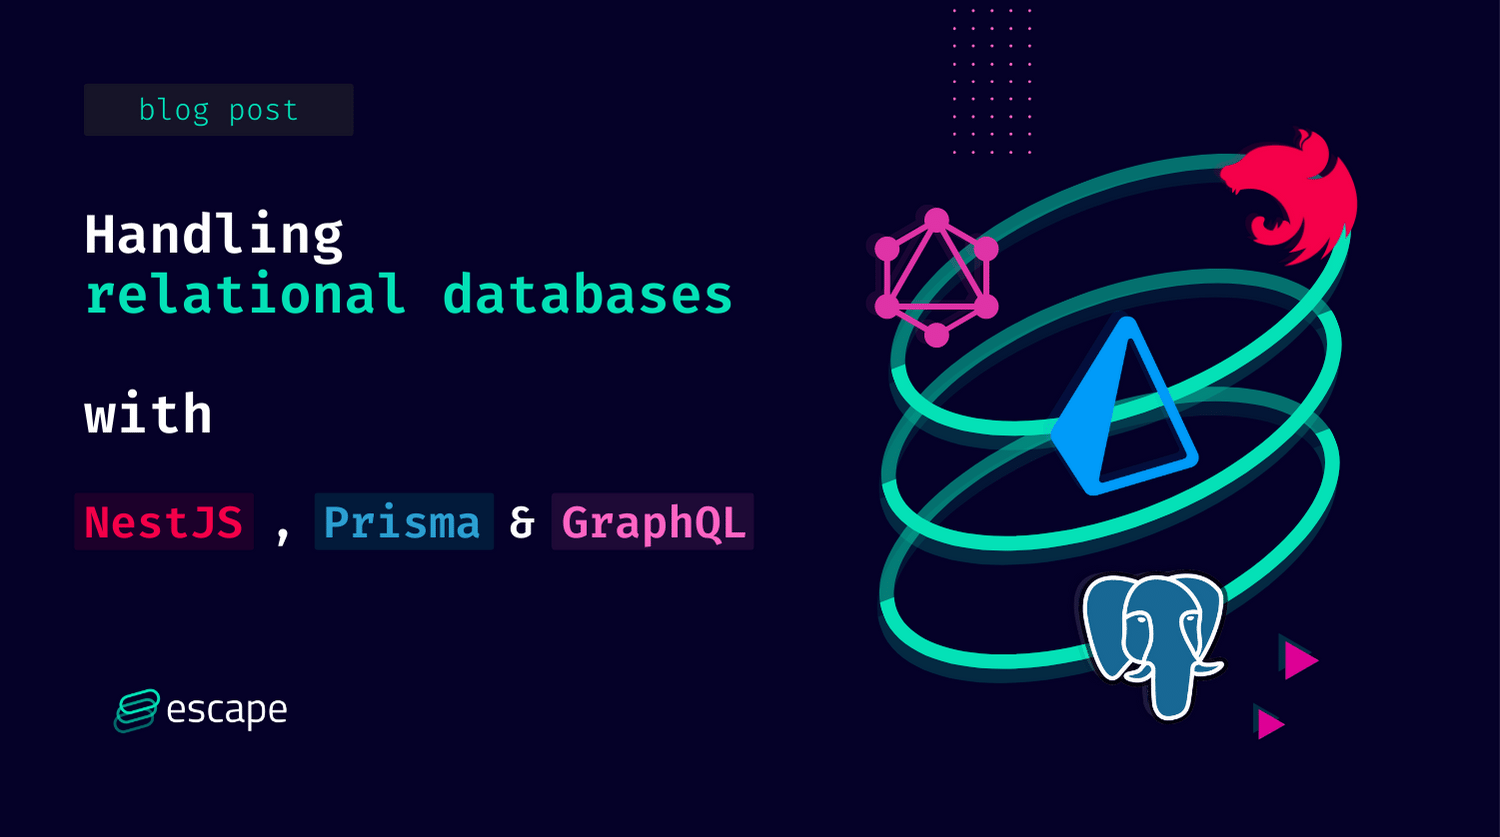 Handling relational databases with NestJS, Prisma and GraphQL